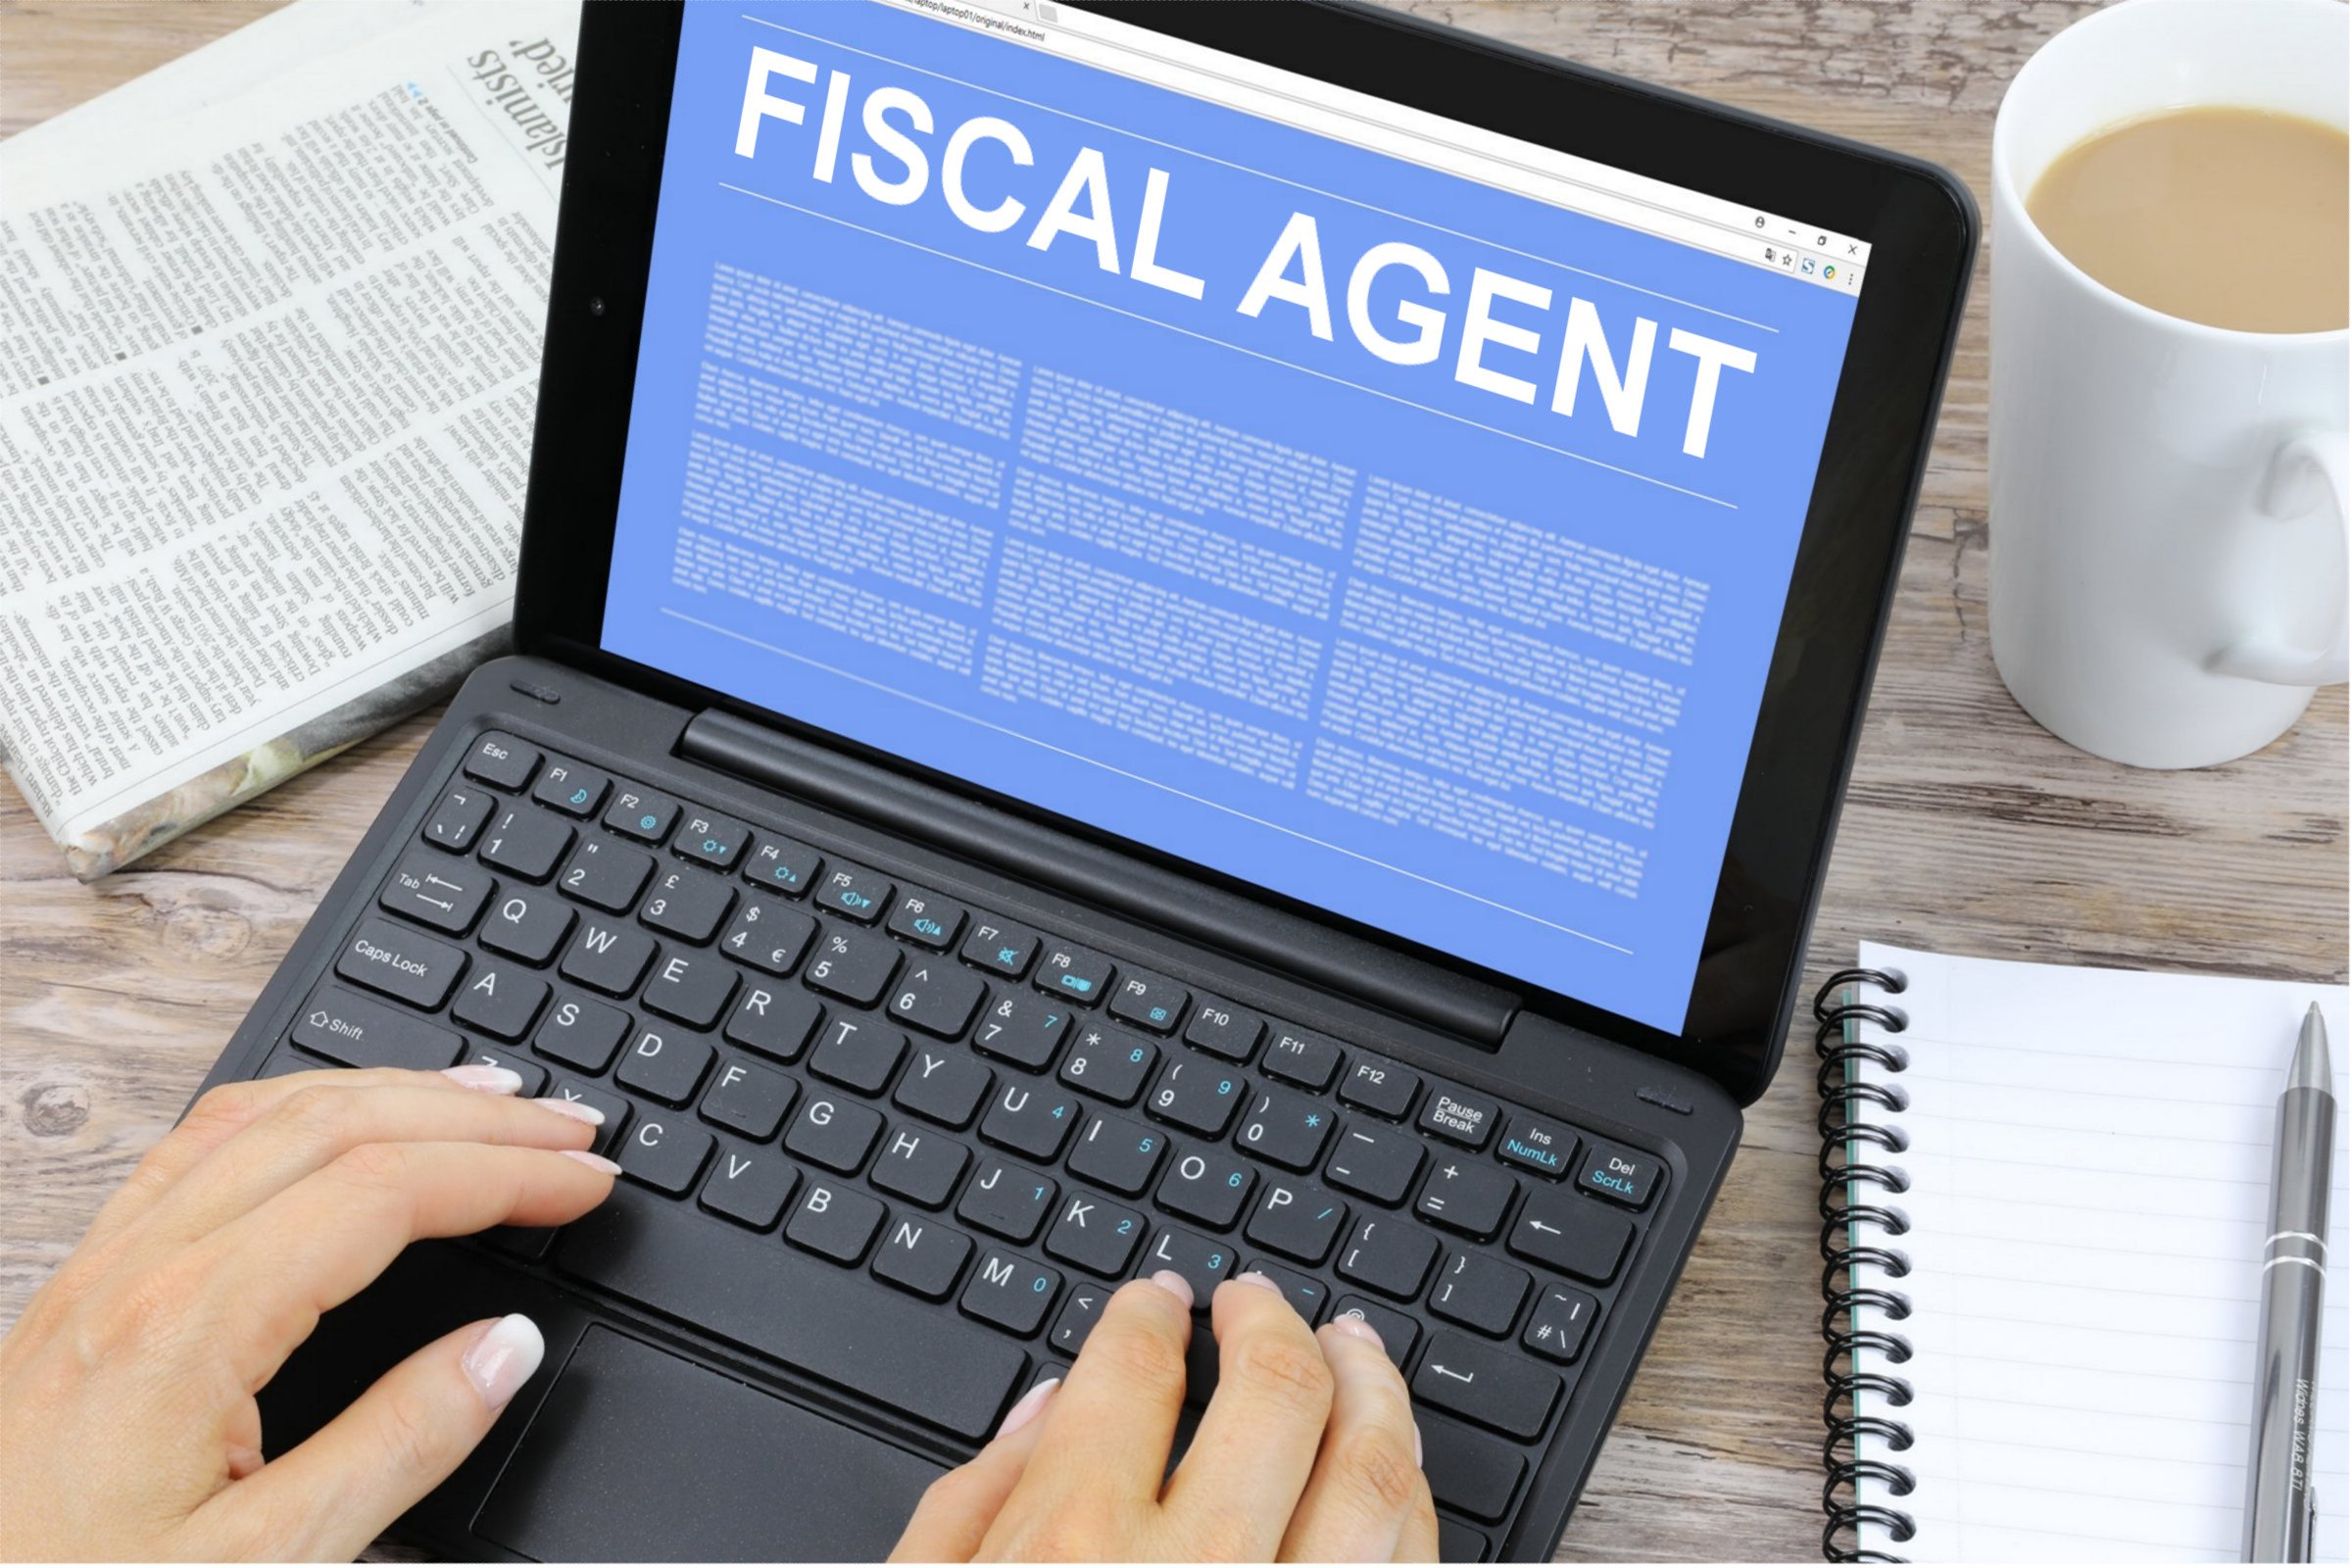 Fiscal Agent